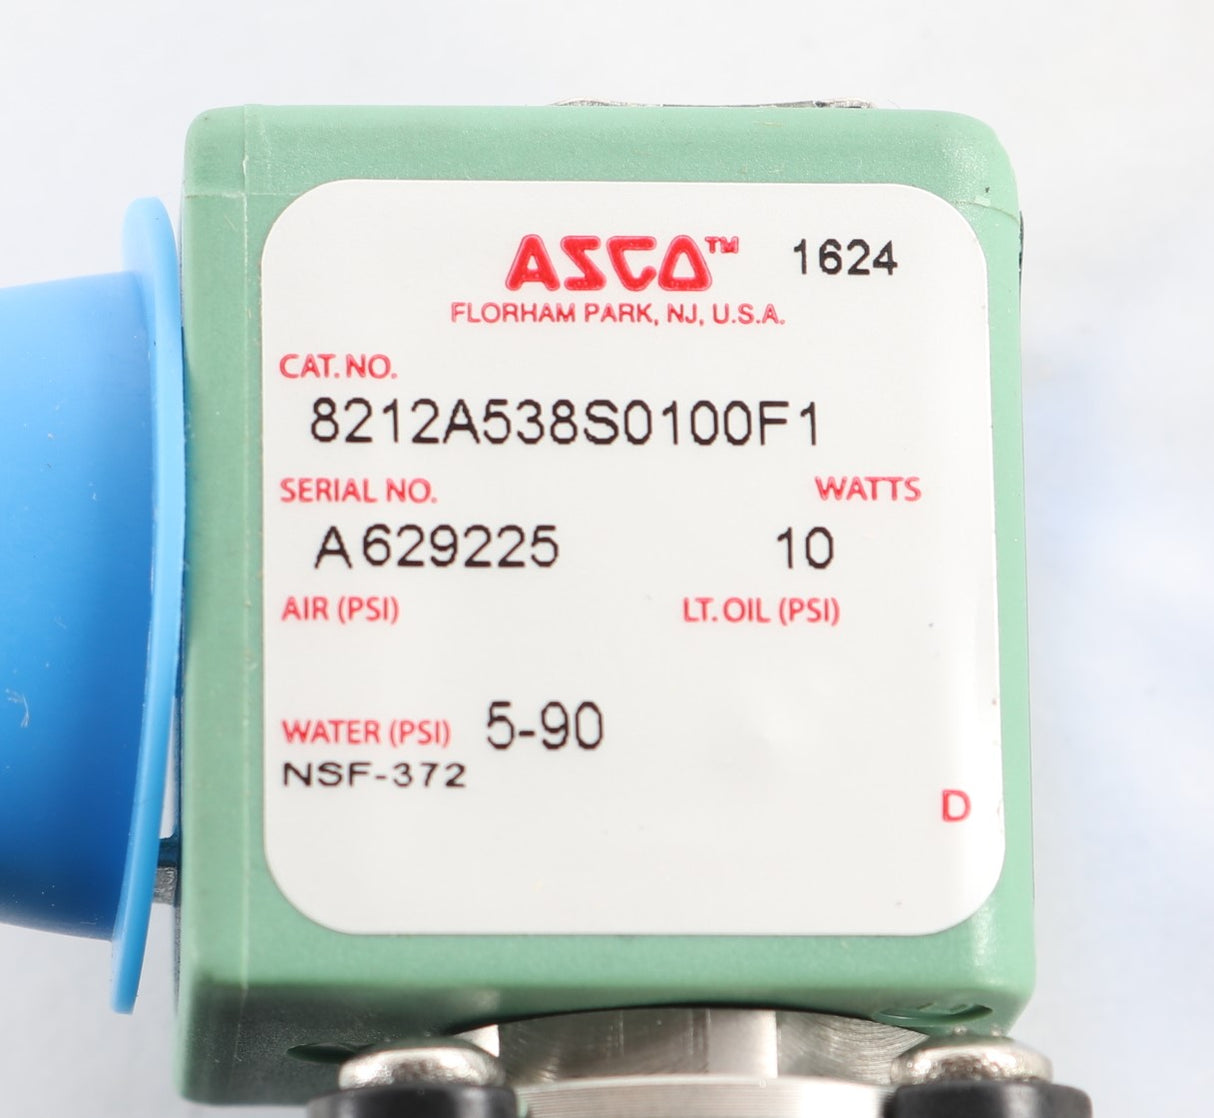 EMERSON - ASCO / JOUCOMATIC / REDHAT ­-­ 8212A538S0100F1 ­-­ SOLENOID VALVE 3/4IN 2 WAY COMPOSITE VALVES 24 DC